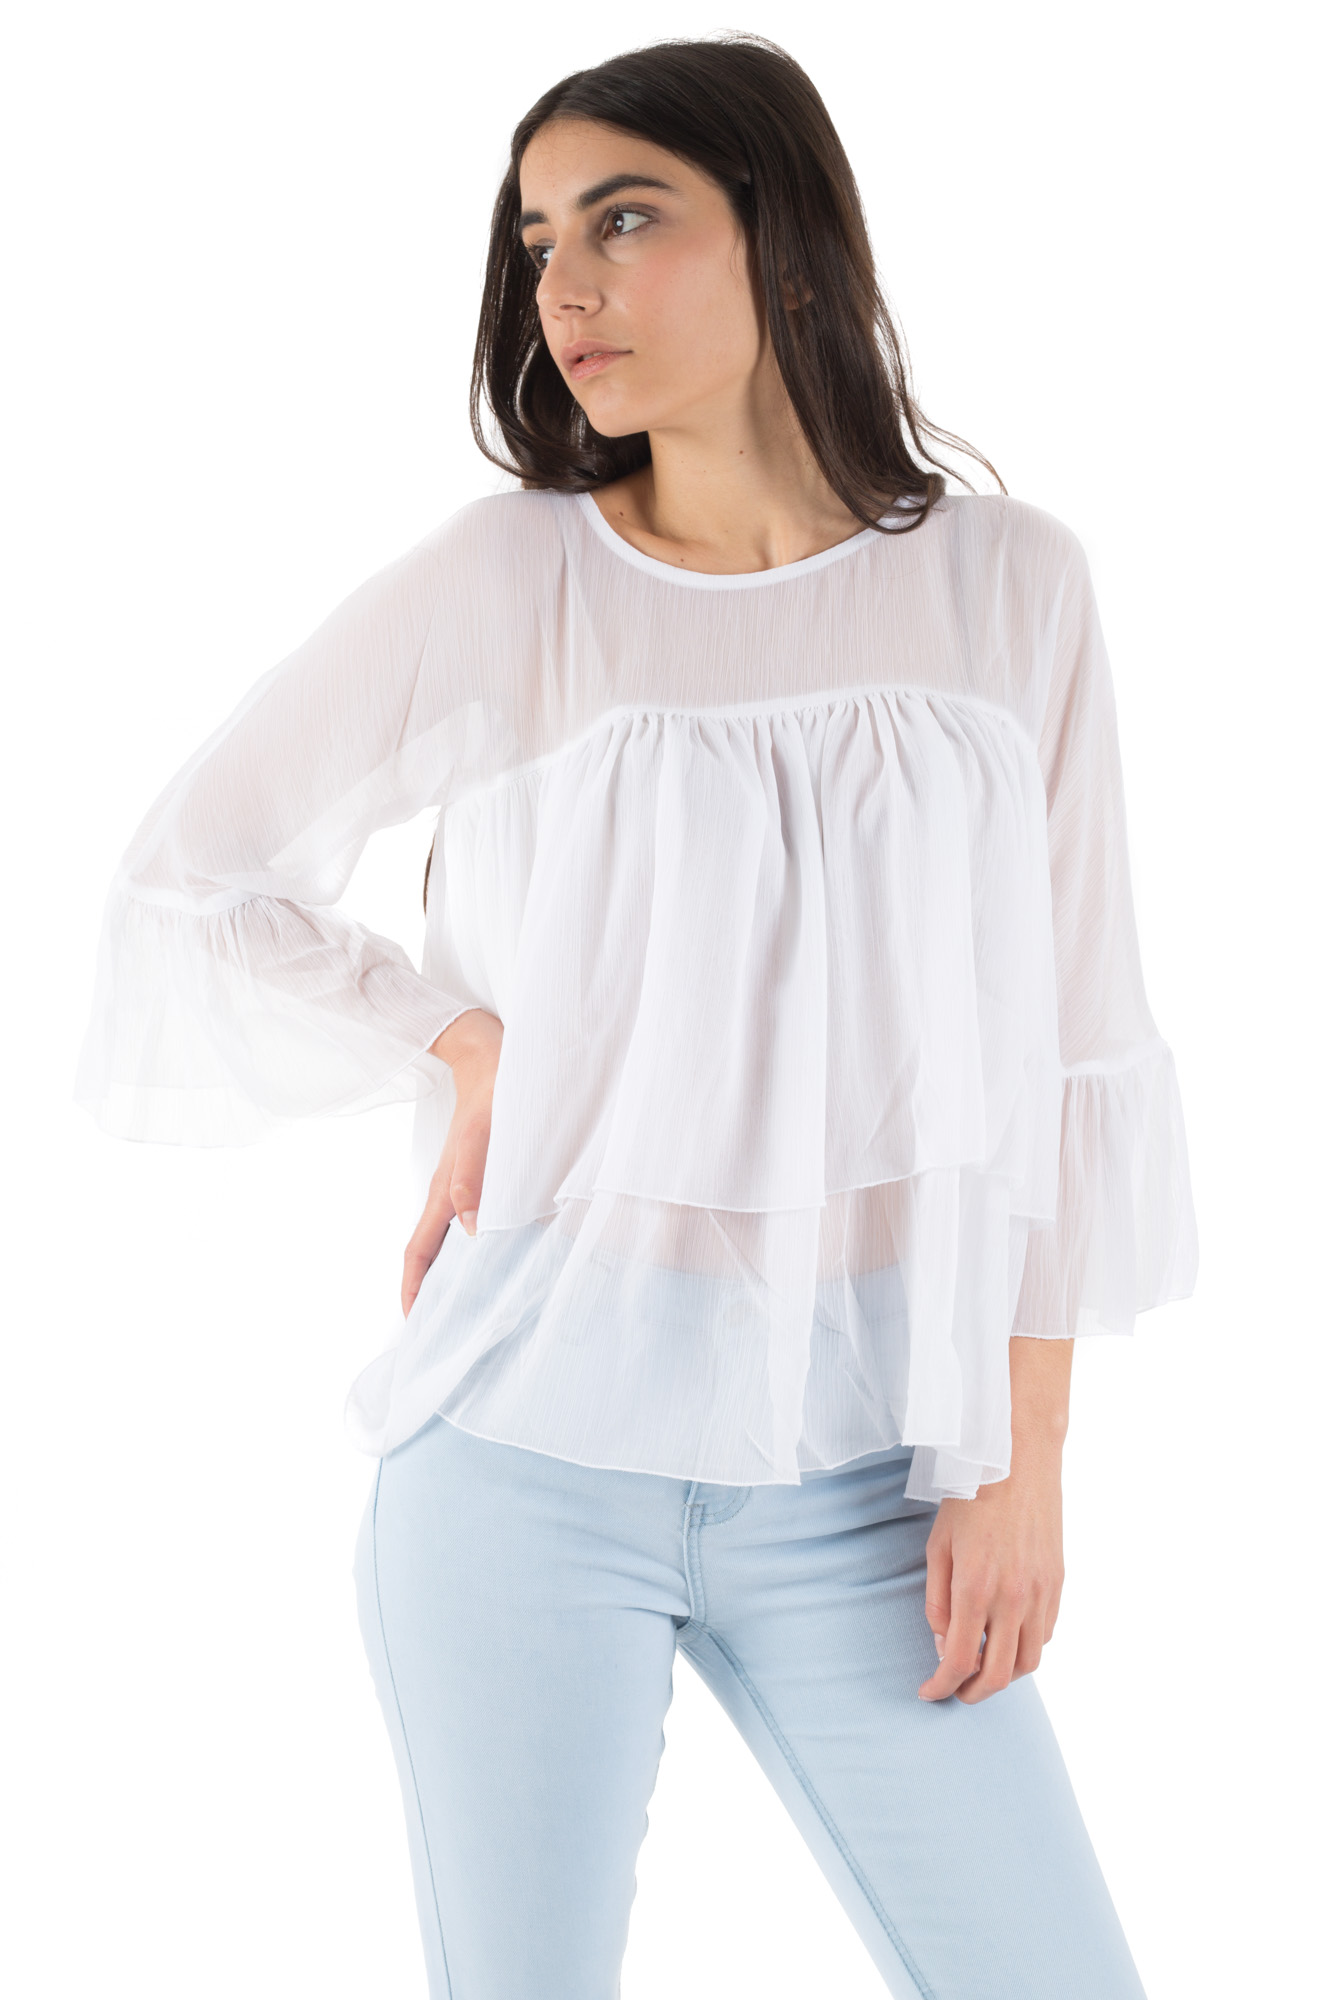 Minimum - Long sleeve top with frill